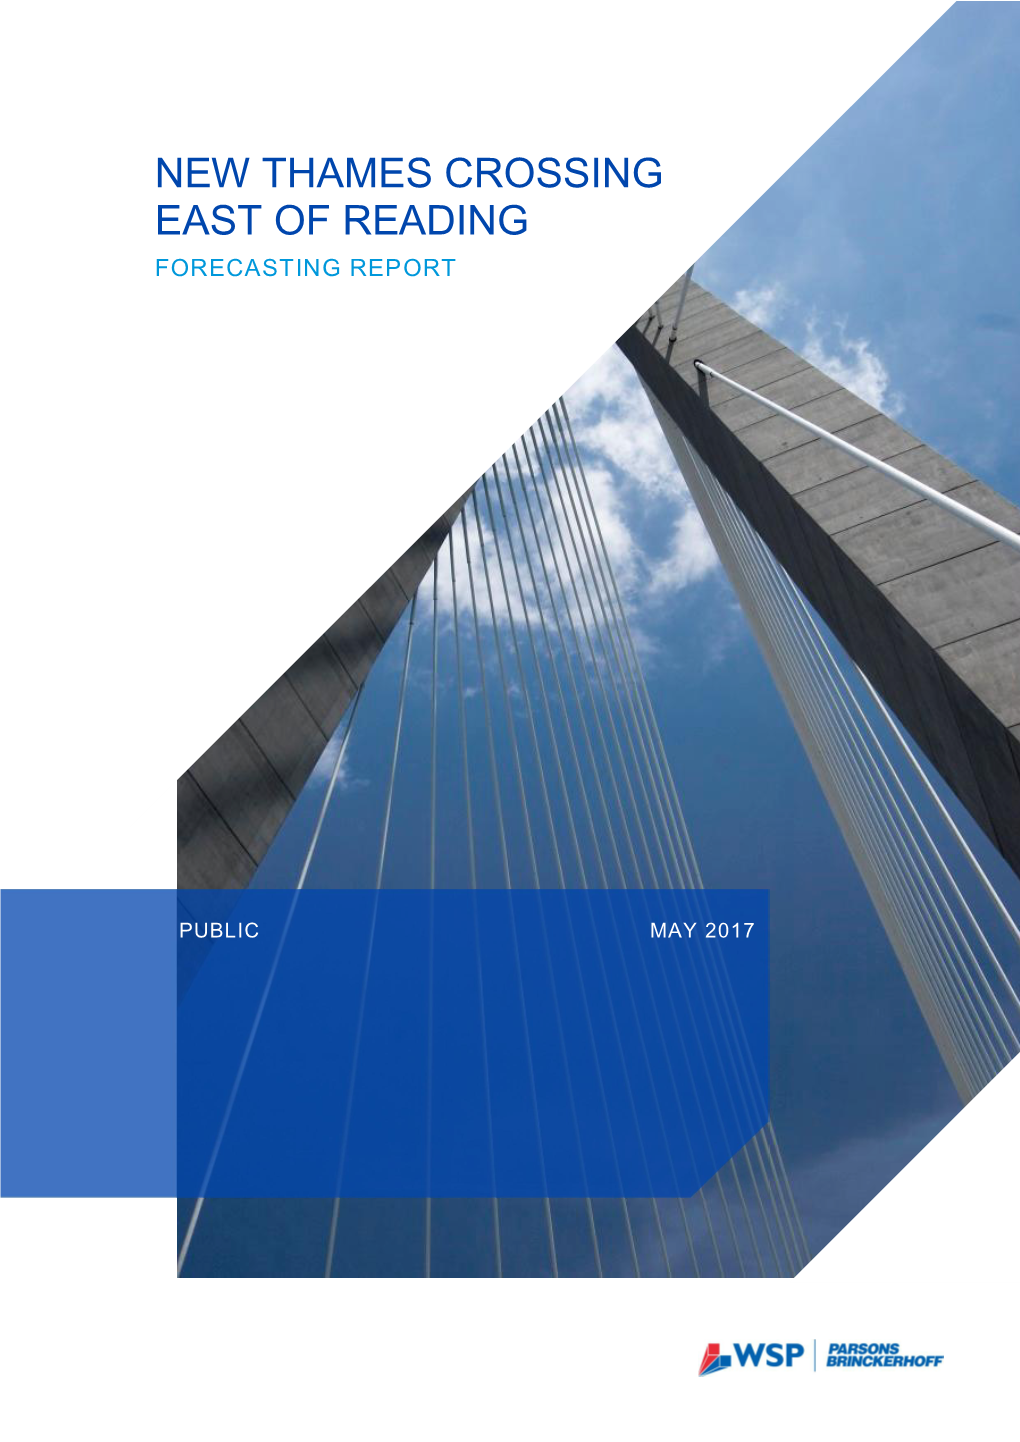 New Thames Crossing East of Reading Forecasting Report